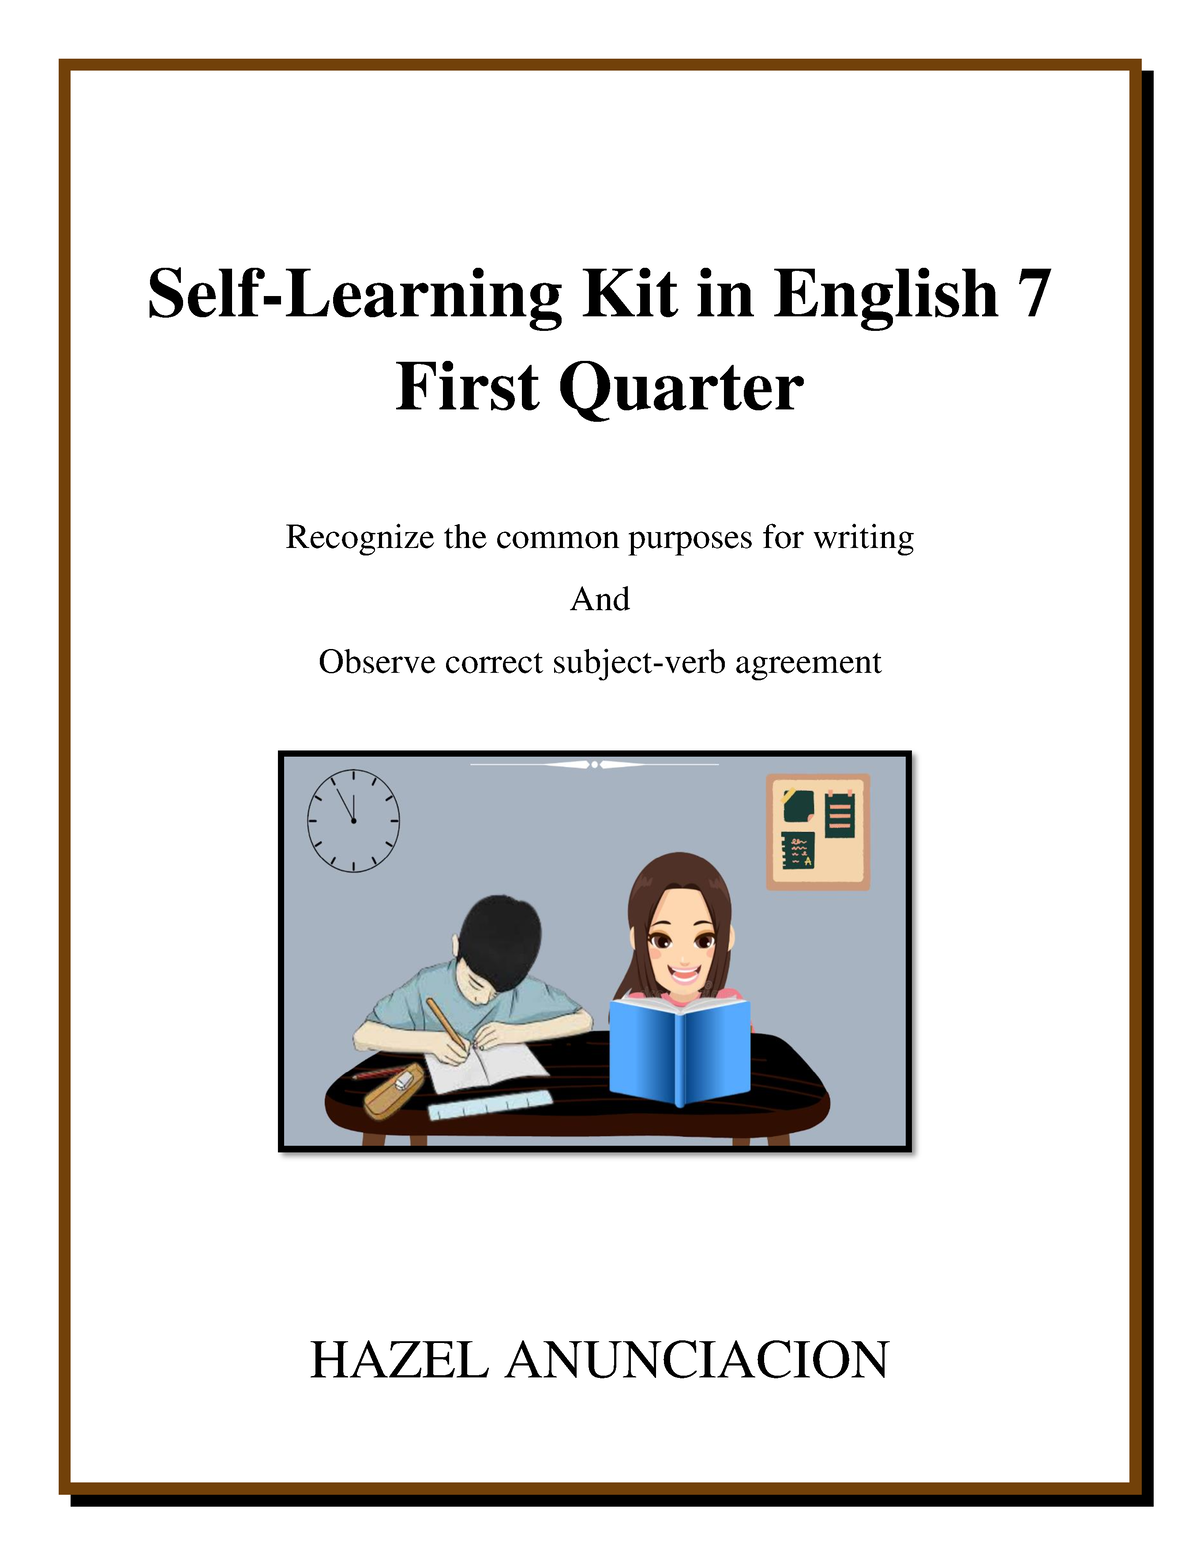 Slk Self Learning Kit Self Learning Kit In English 7 First Quarter Recognize The Common 8923